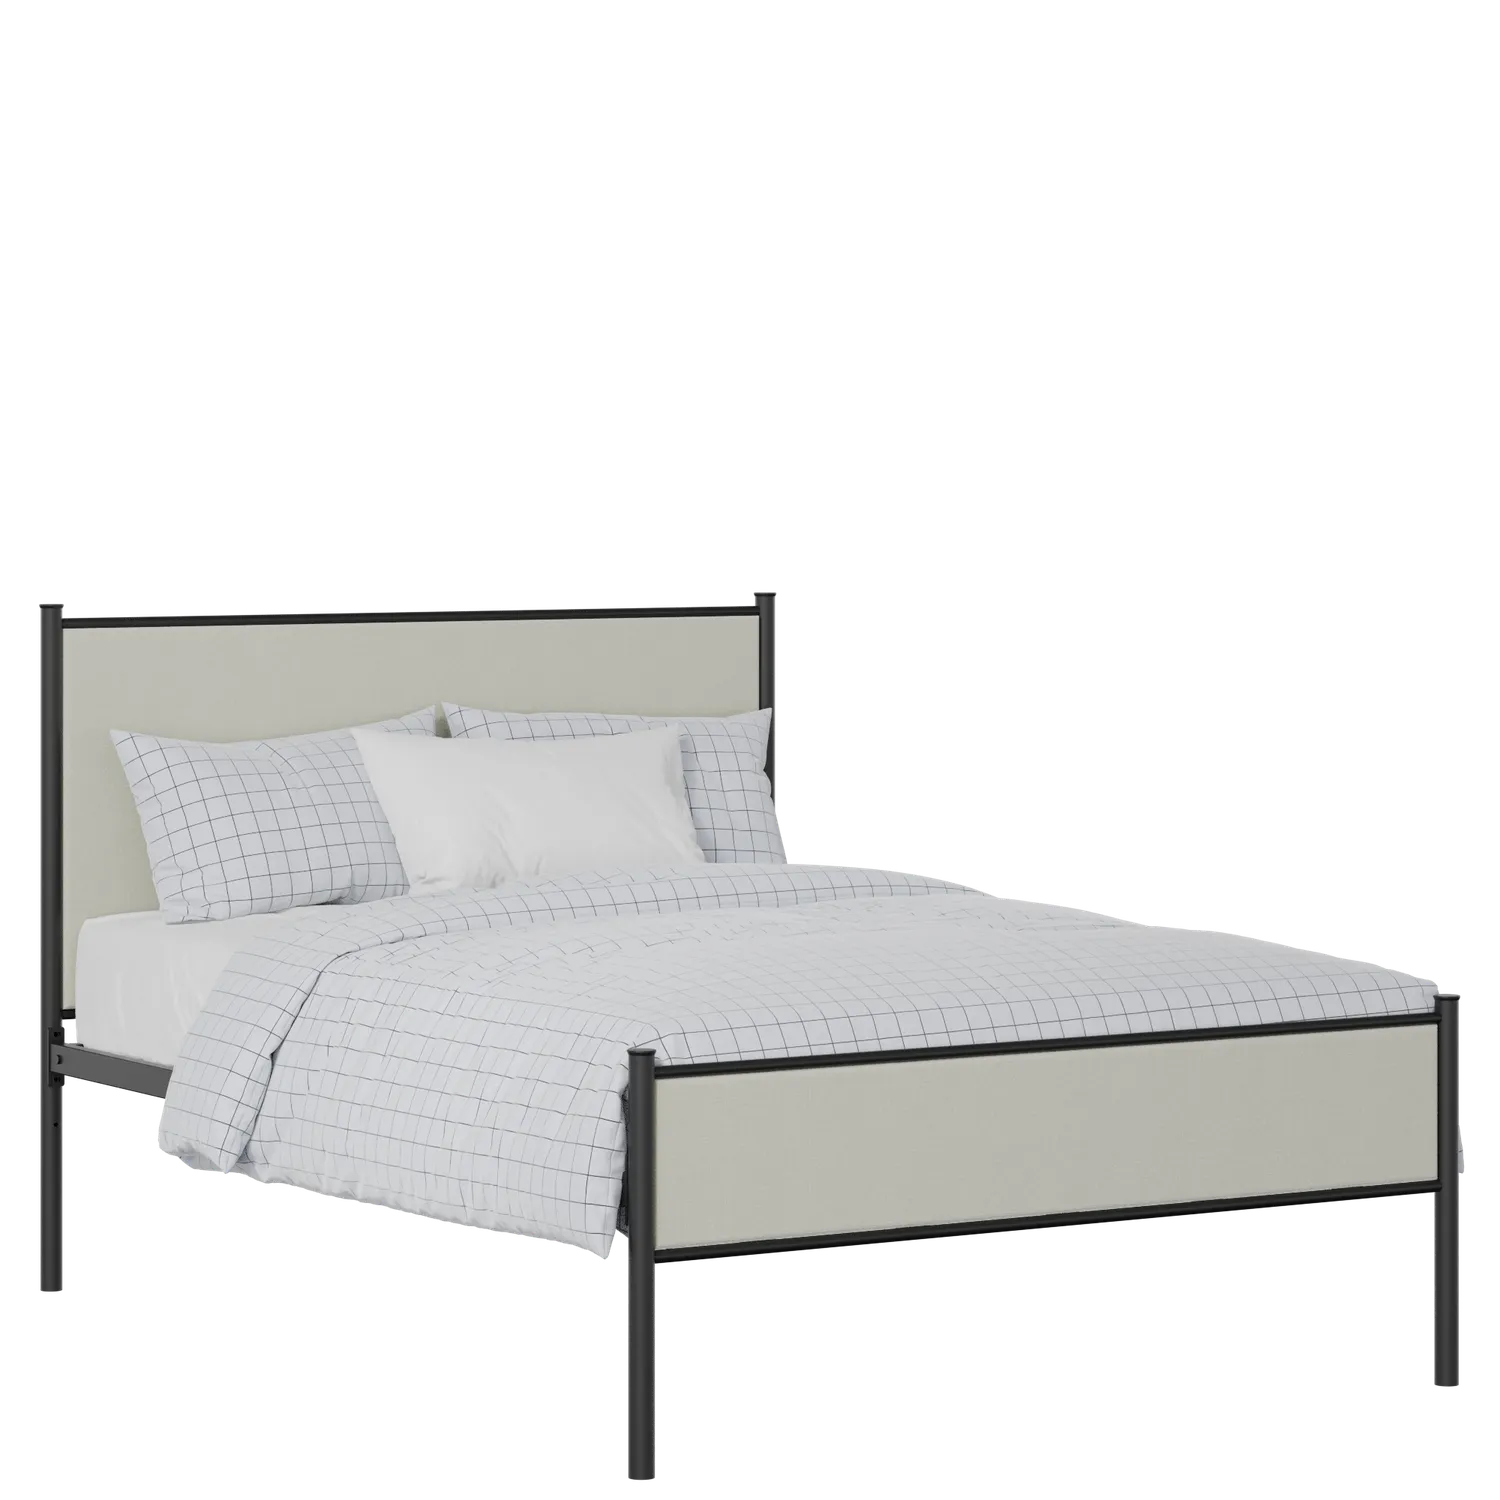 Brest Slim iron/metal upholstered bed in black with oatmeal fabric